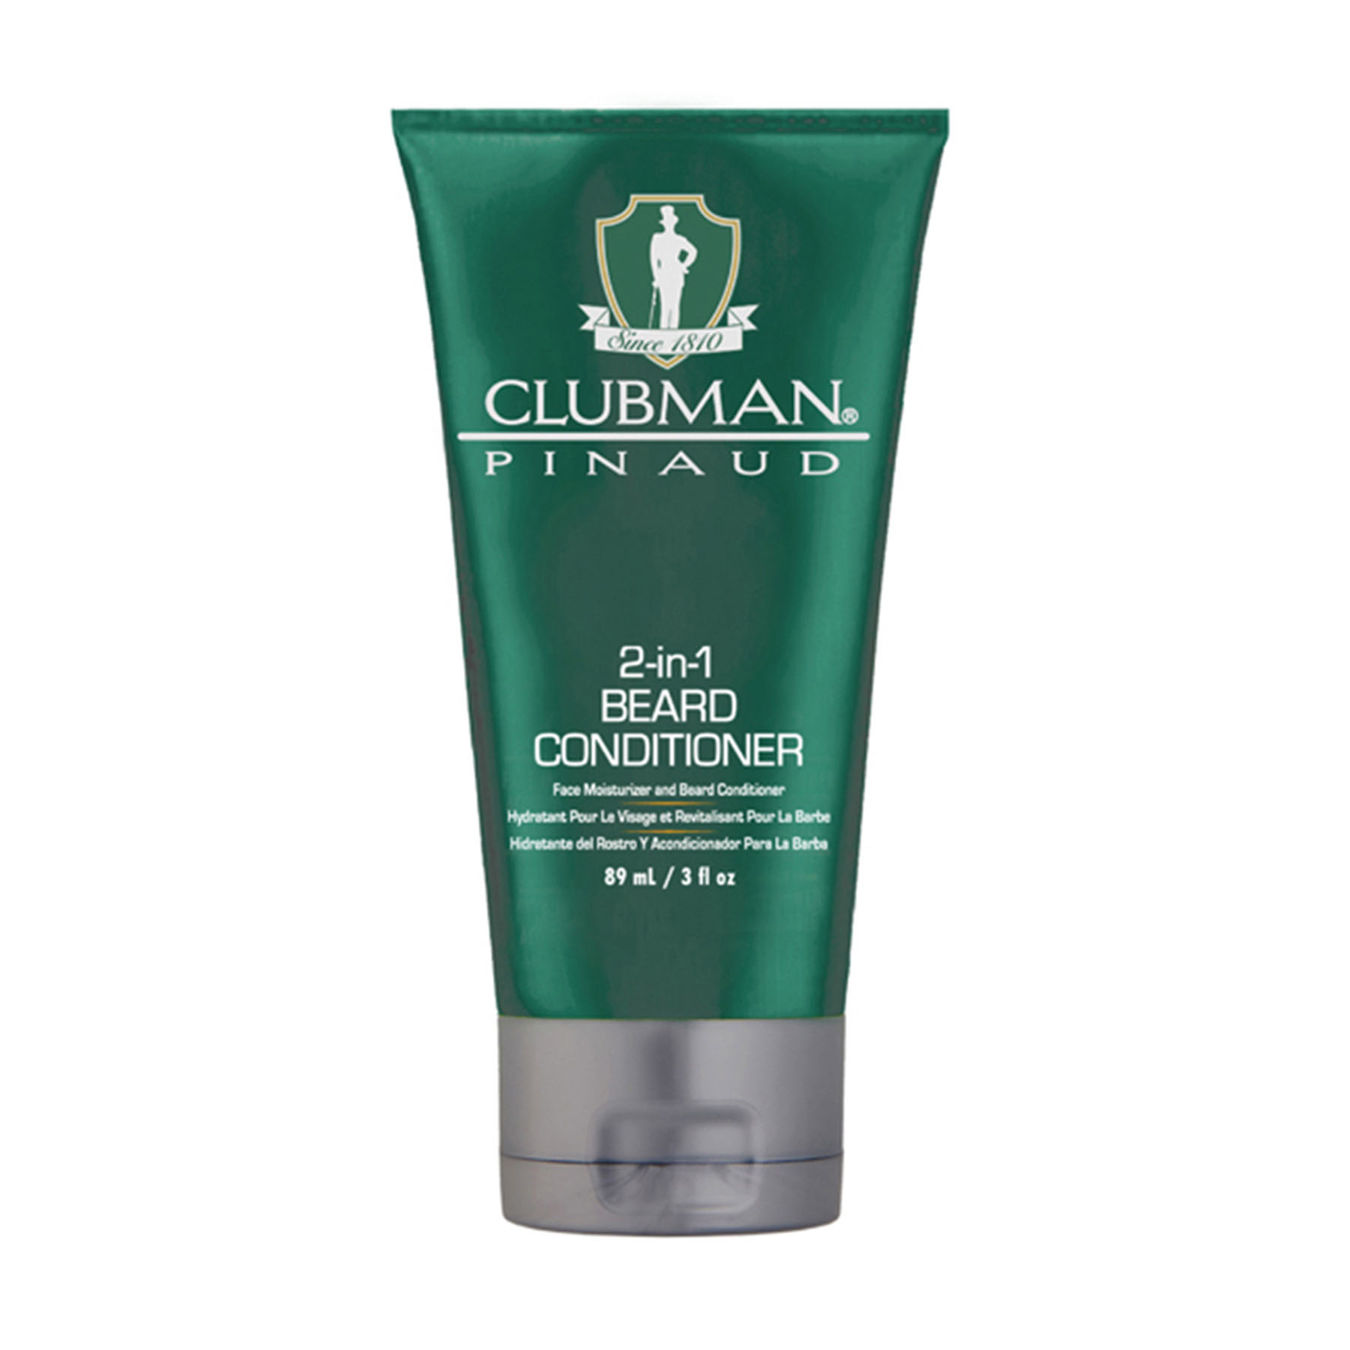 Clubman Beard Conditioner 2-in-1 Face Moisturizer and Be